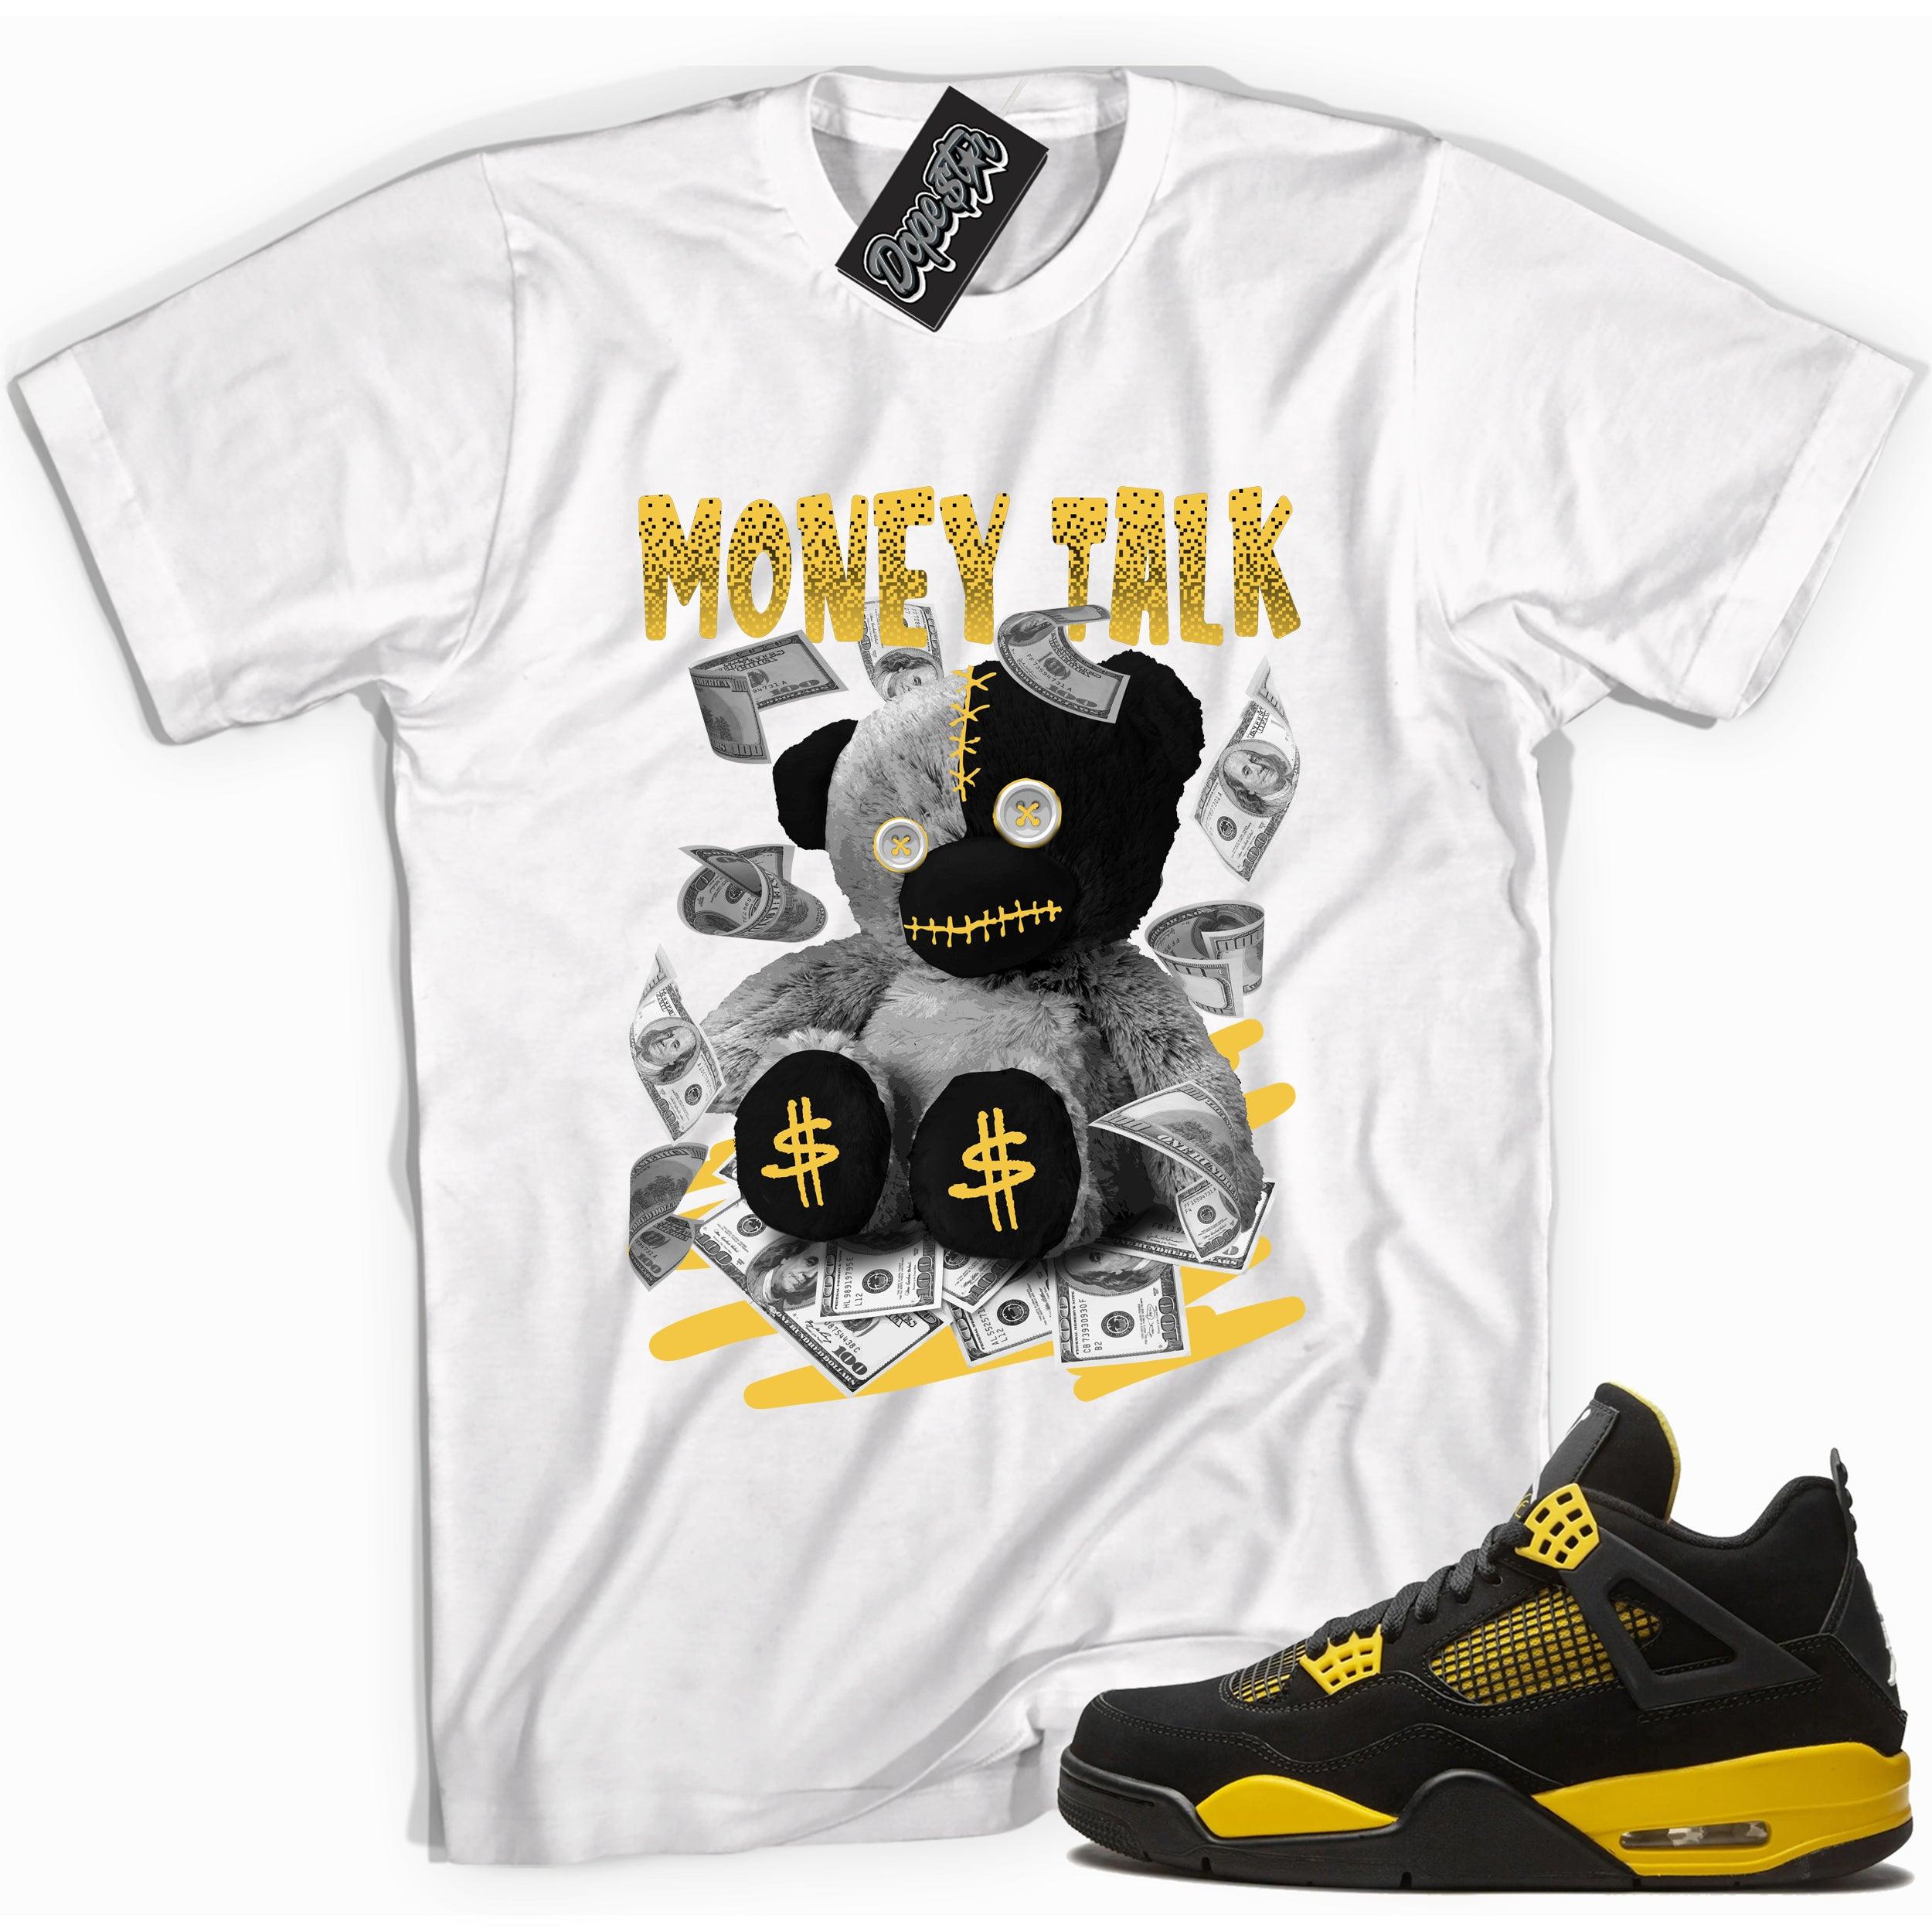 Cool white graphic tee with 'money talk bear' print, that perfectly matches Air Jordan 4 Thunder sneakers